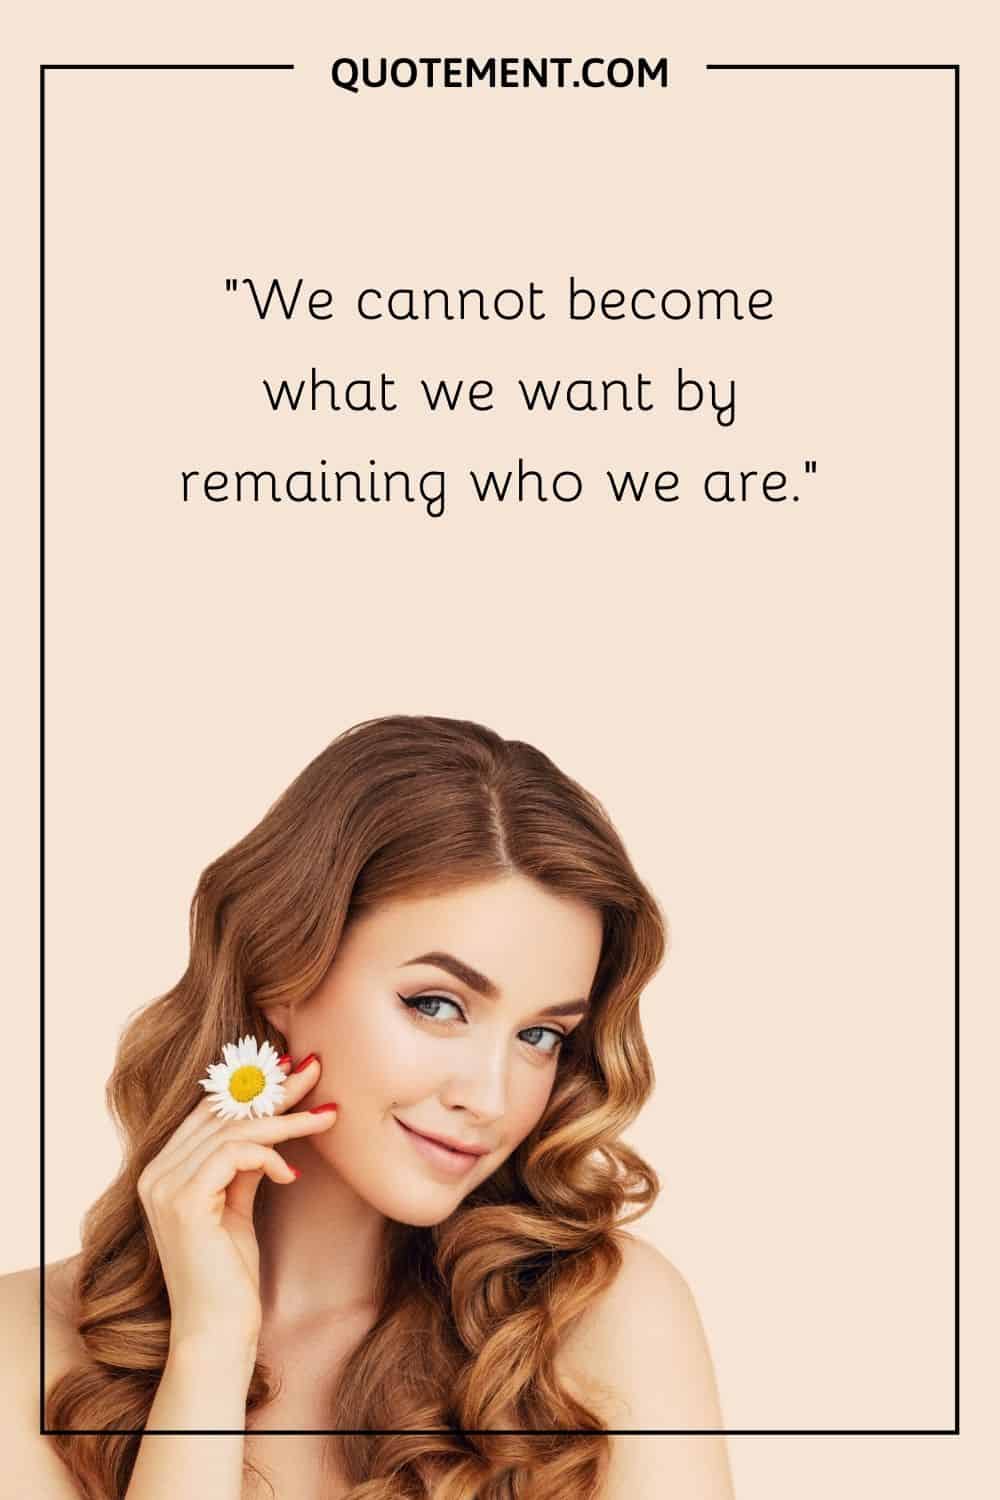 We cannot become what we want by remaining who we are.